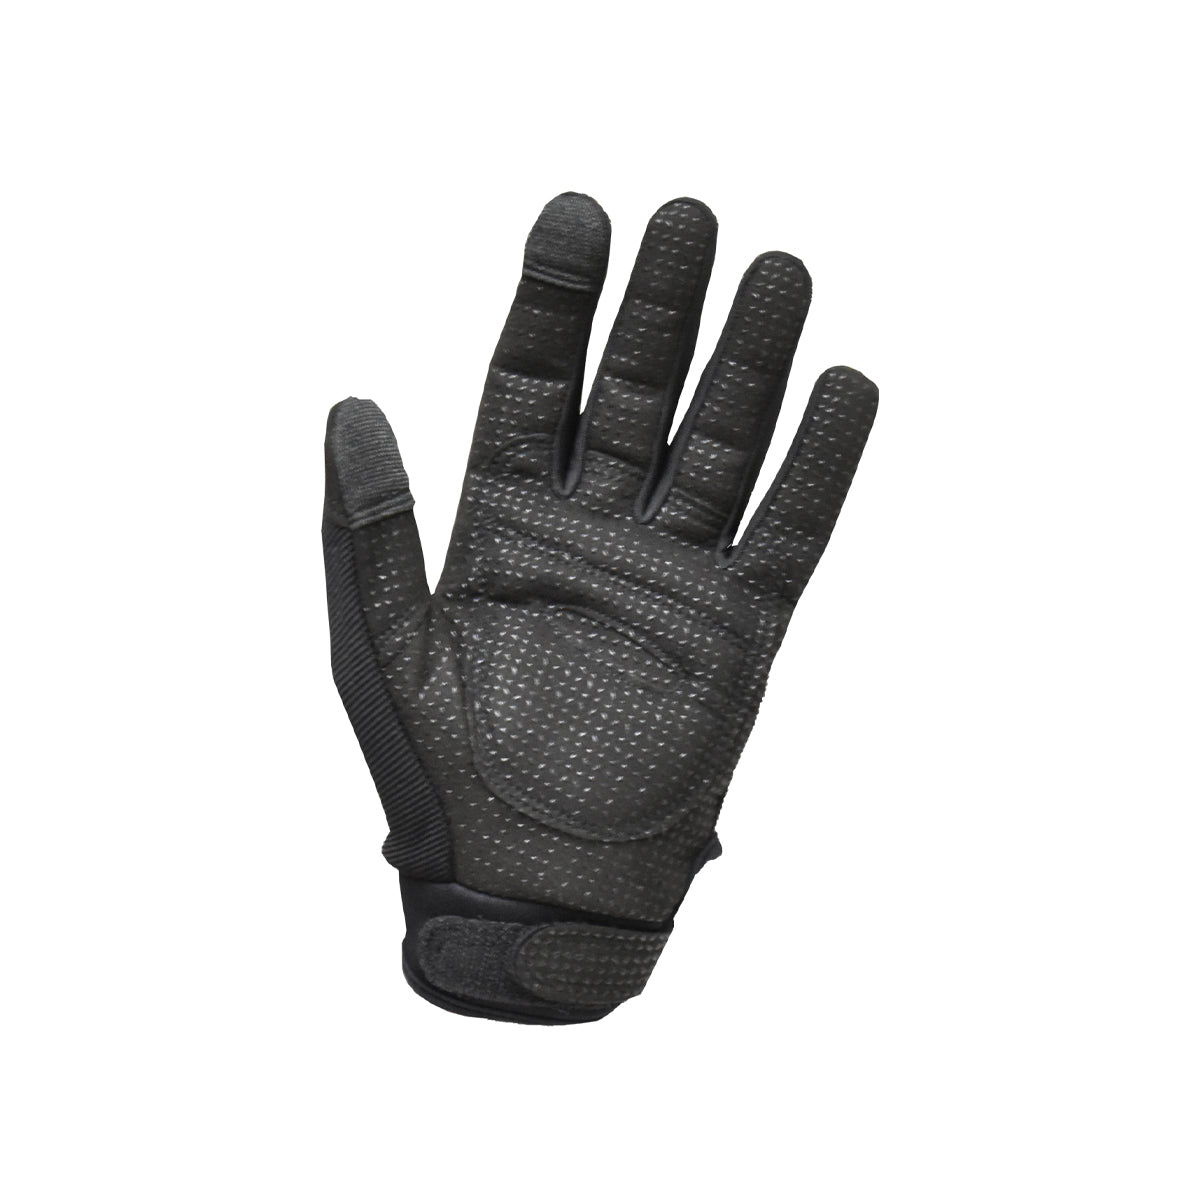 RFB Ready For Battle Glove with Finger Guards, Black